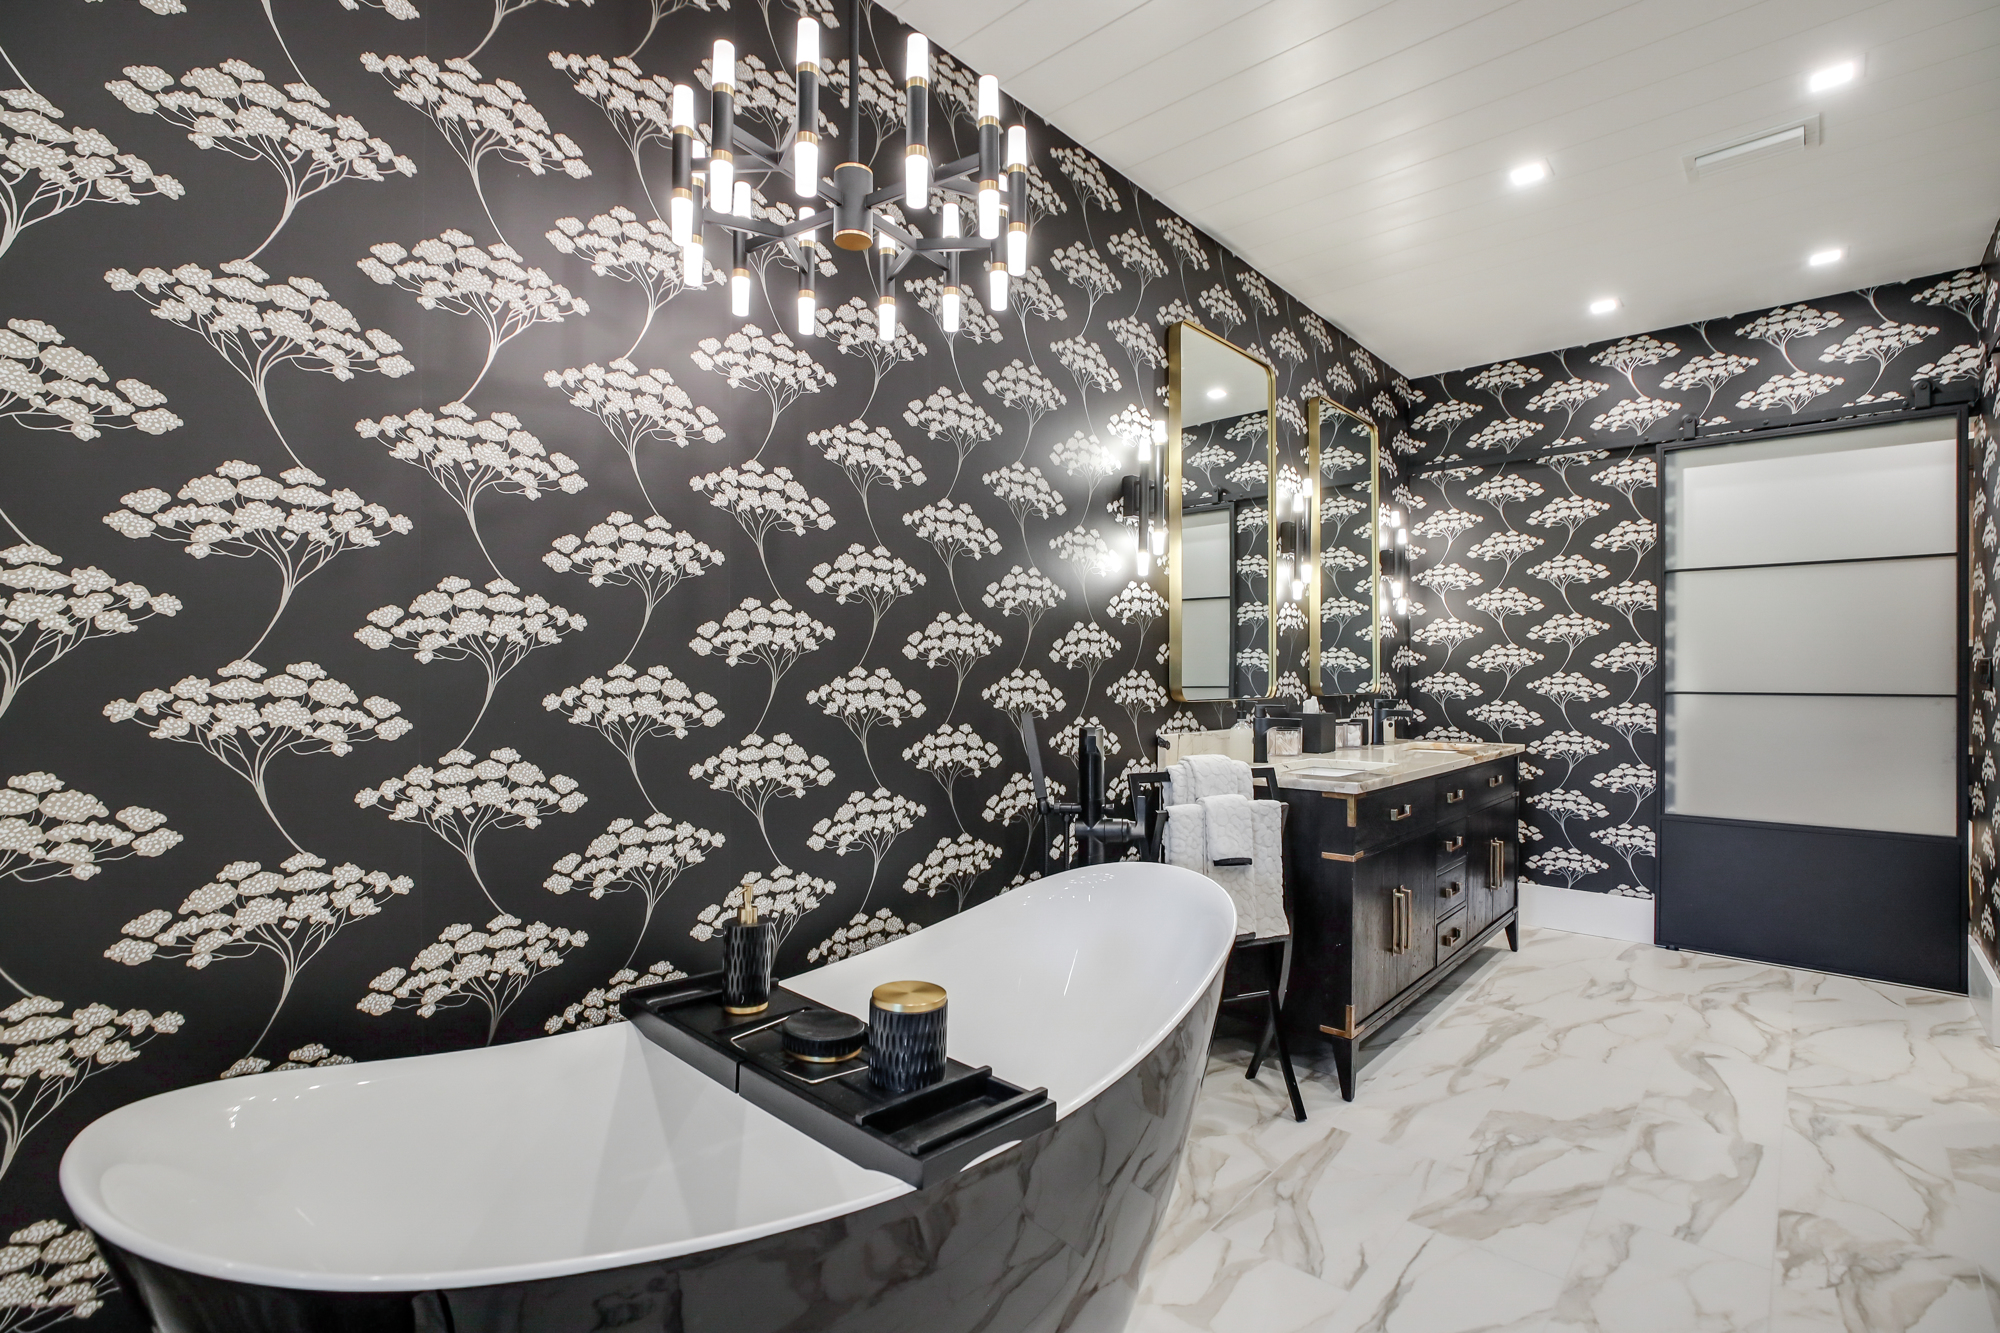 A stand-alone tub discovered on Wayfair makes a dramatic statement in the master bath.